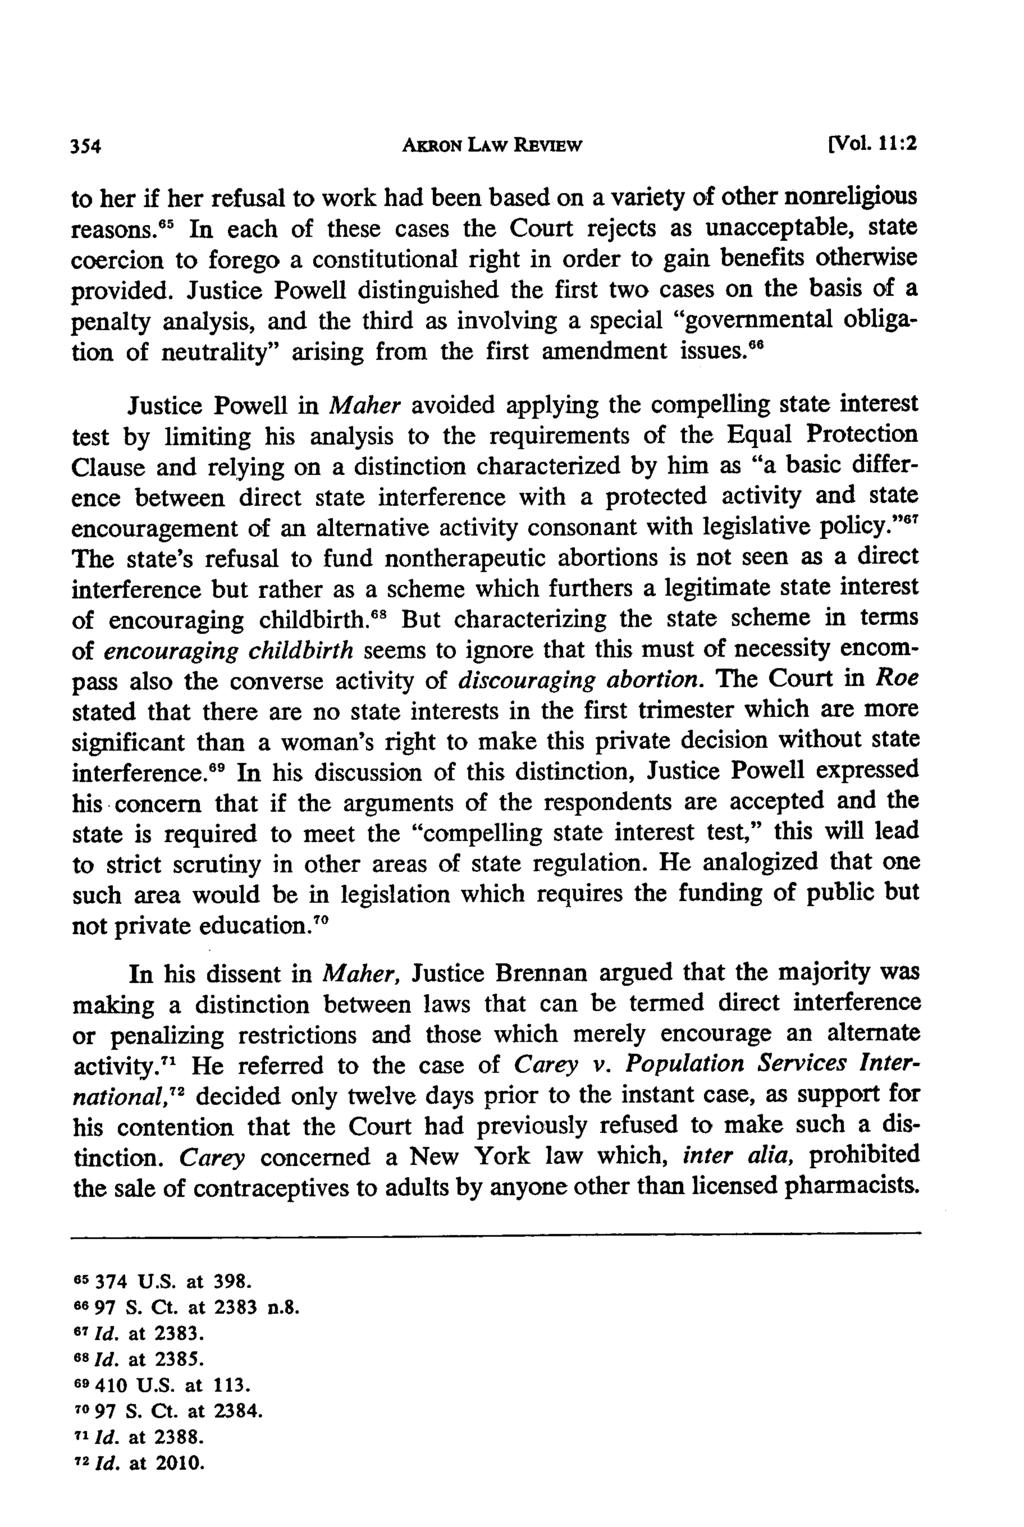 Akron Law Review, Vol. 11 [1978], Iss. 2, Art. 6 AKRON LAW REVIEW [V/ol. 11:2 to her if her refusal to work had been based on a variety of other nonreligious reasons.